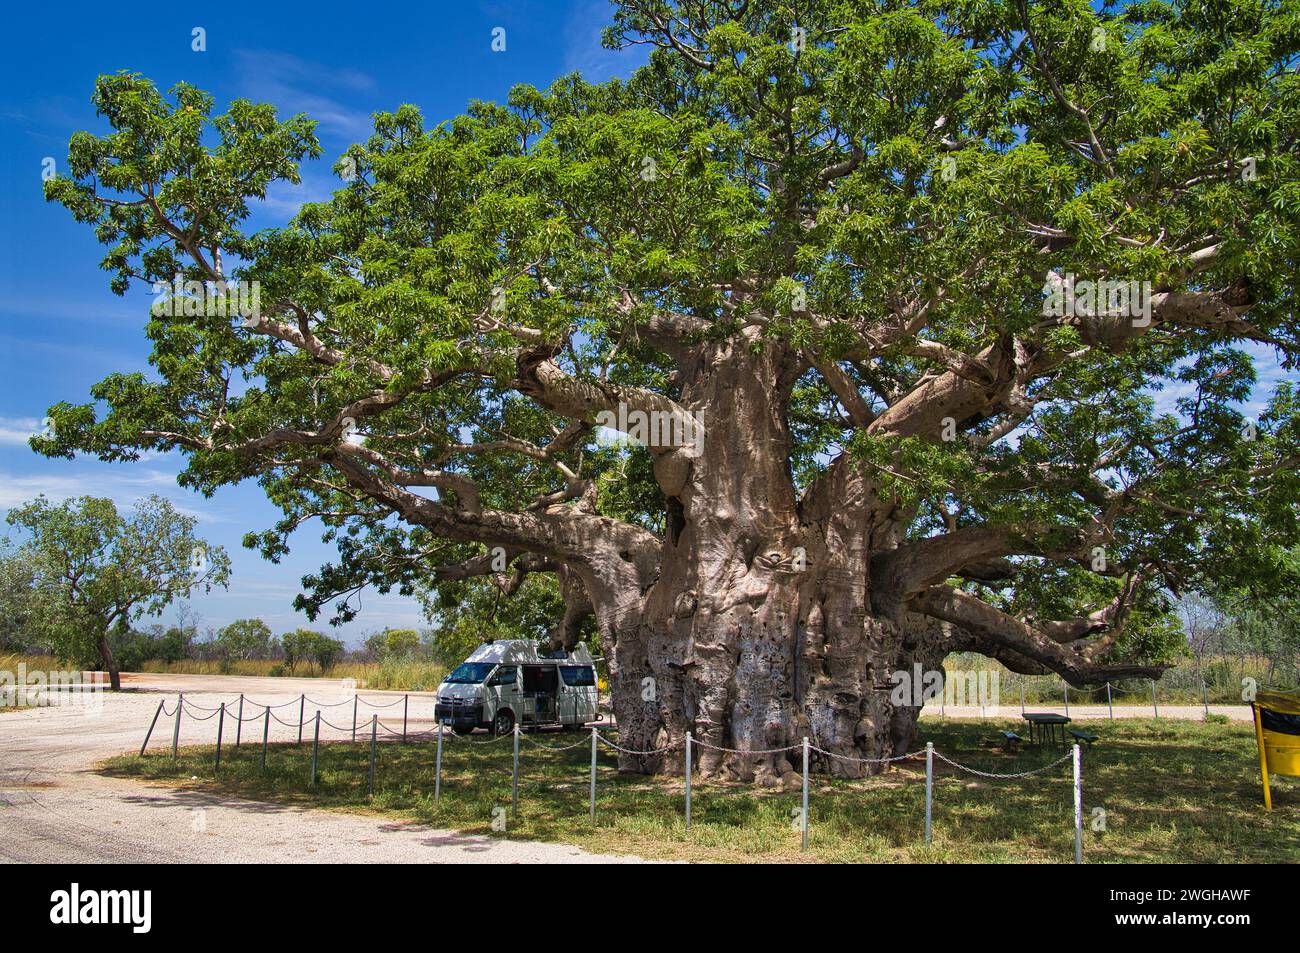 Campervan parked in the shade of a giant baobab tree, Derby, Western Australia, a 1500 year old, hollow Adansonia gregorii. Stock Photo